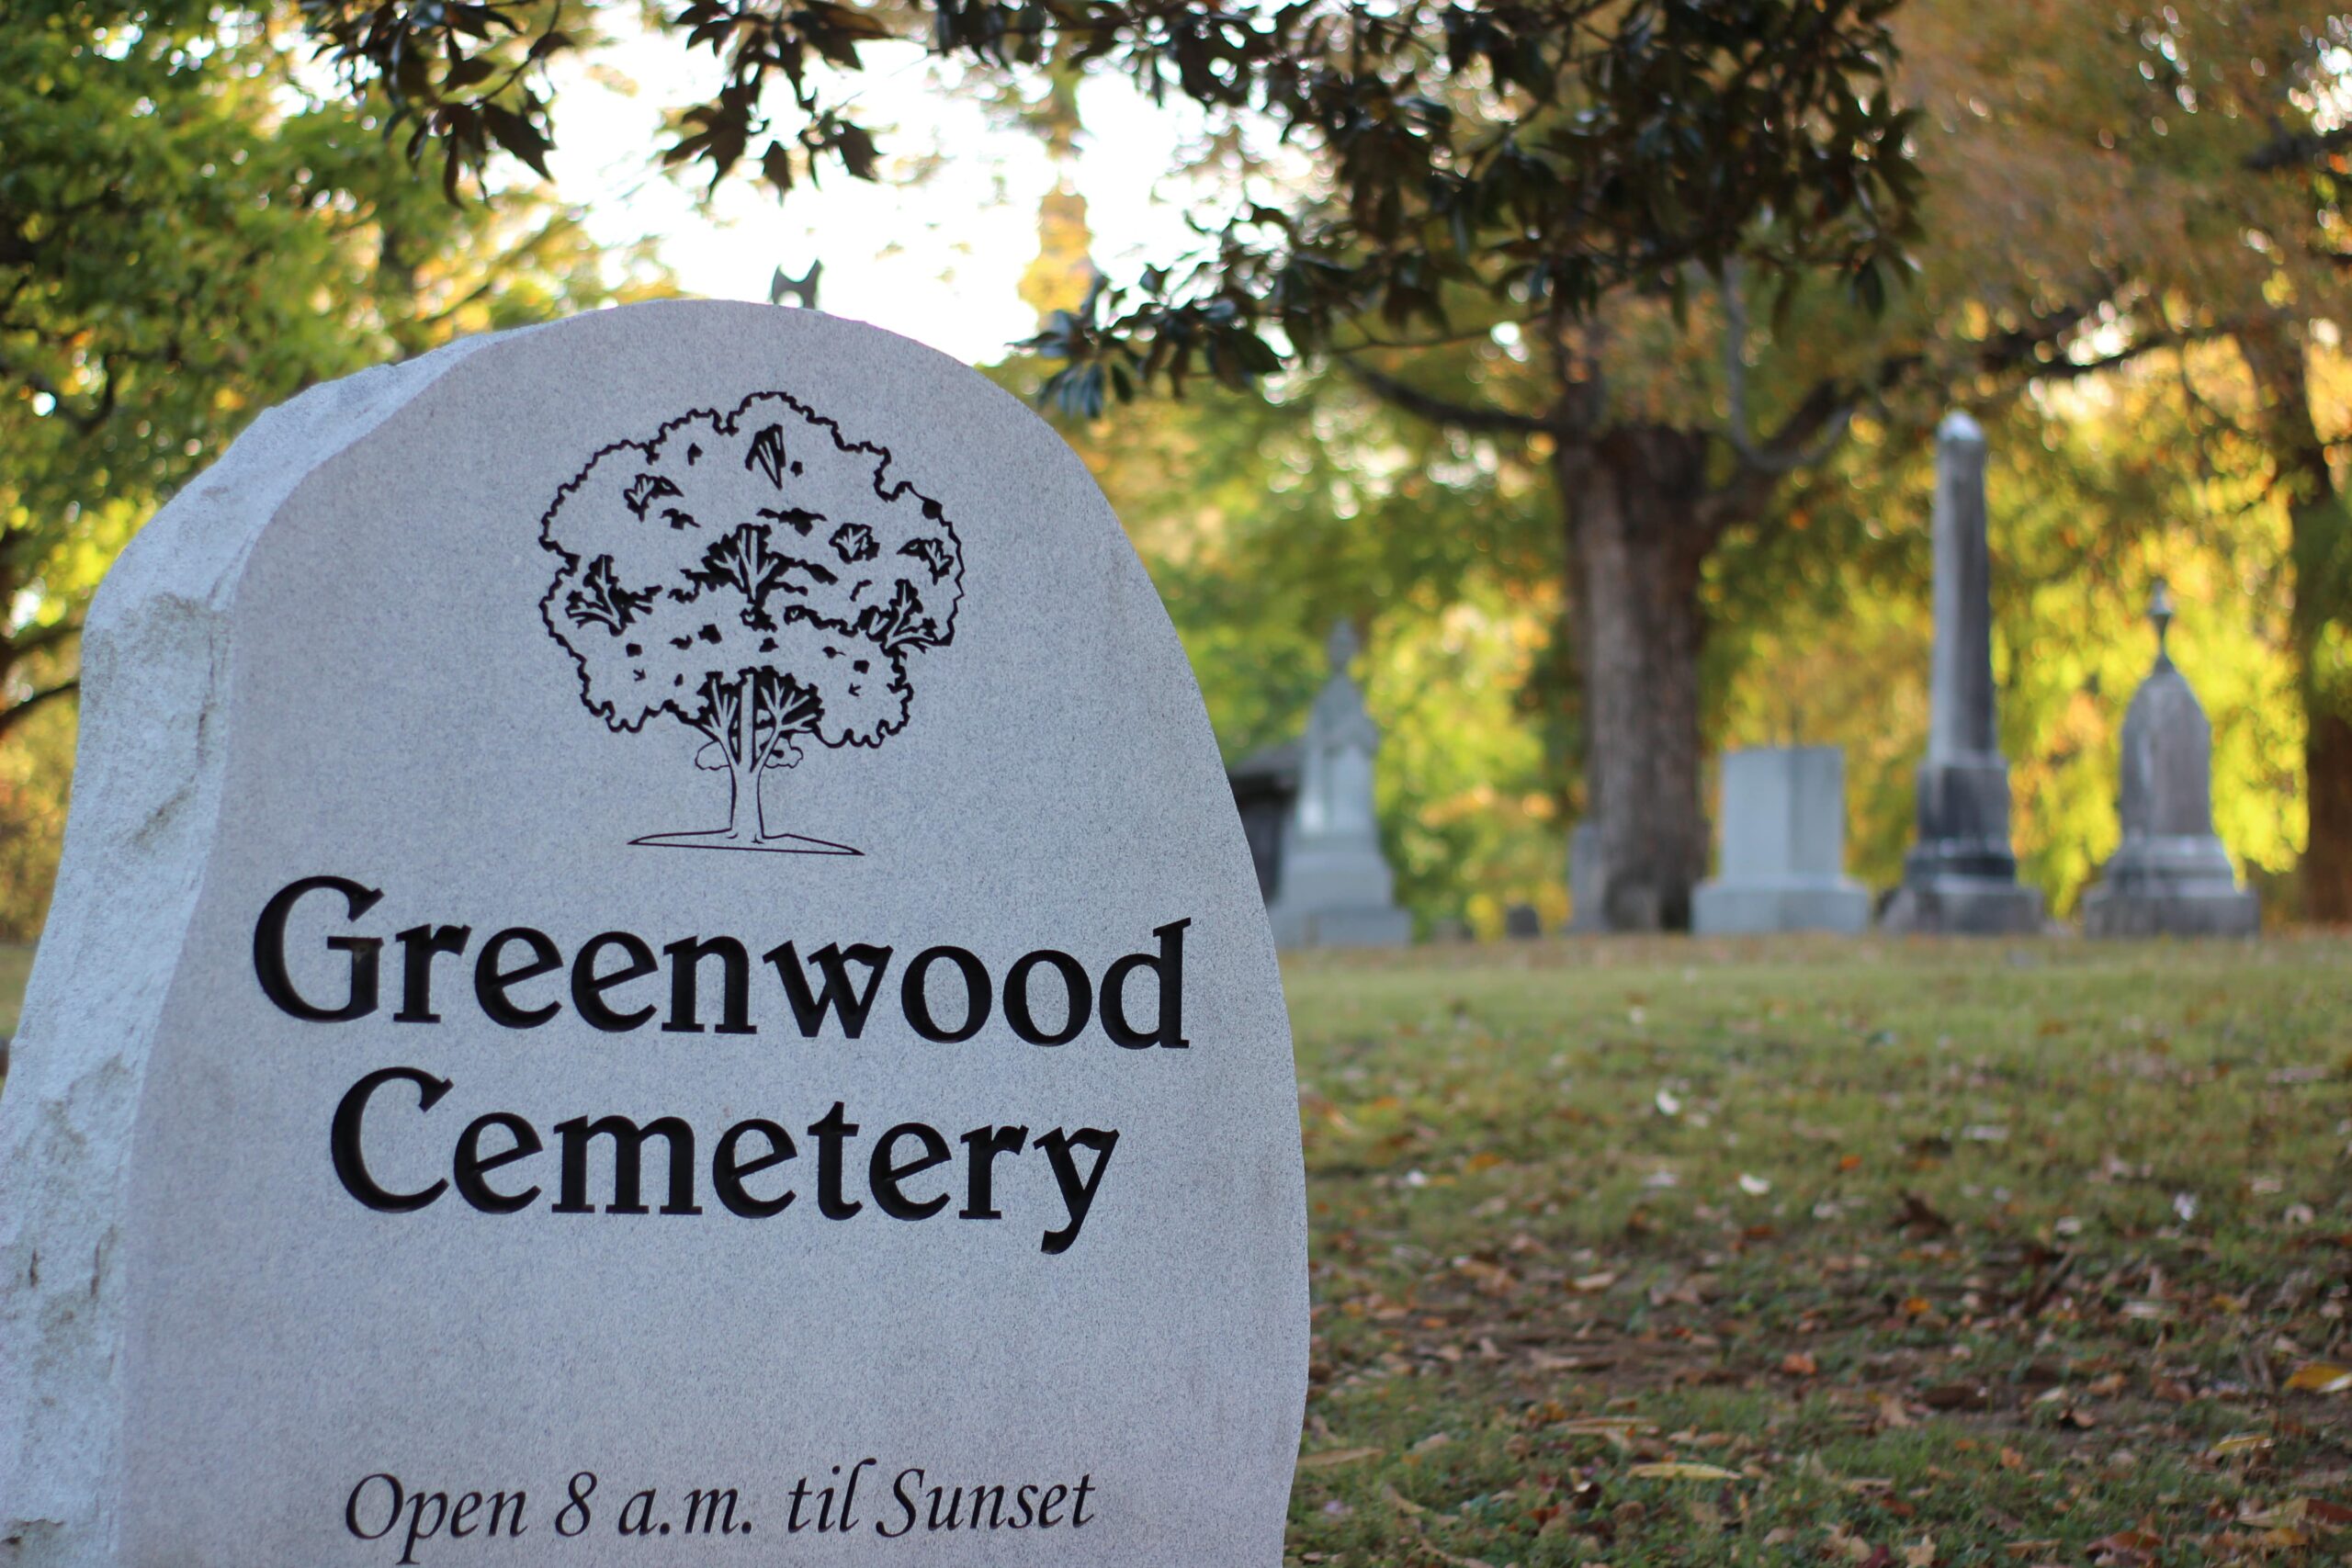 green wood cemetery tours